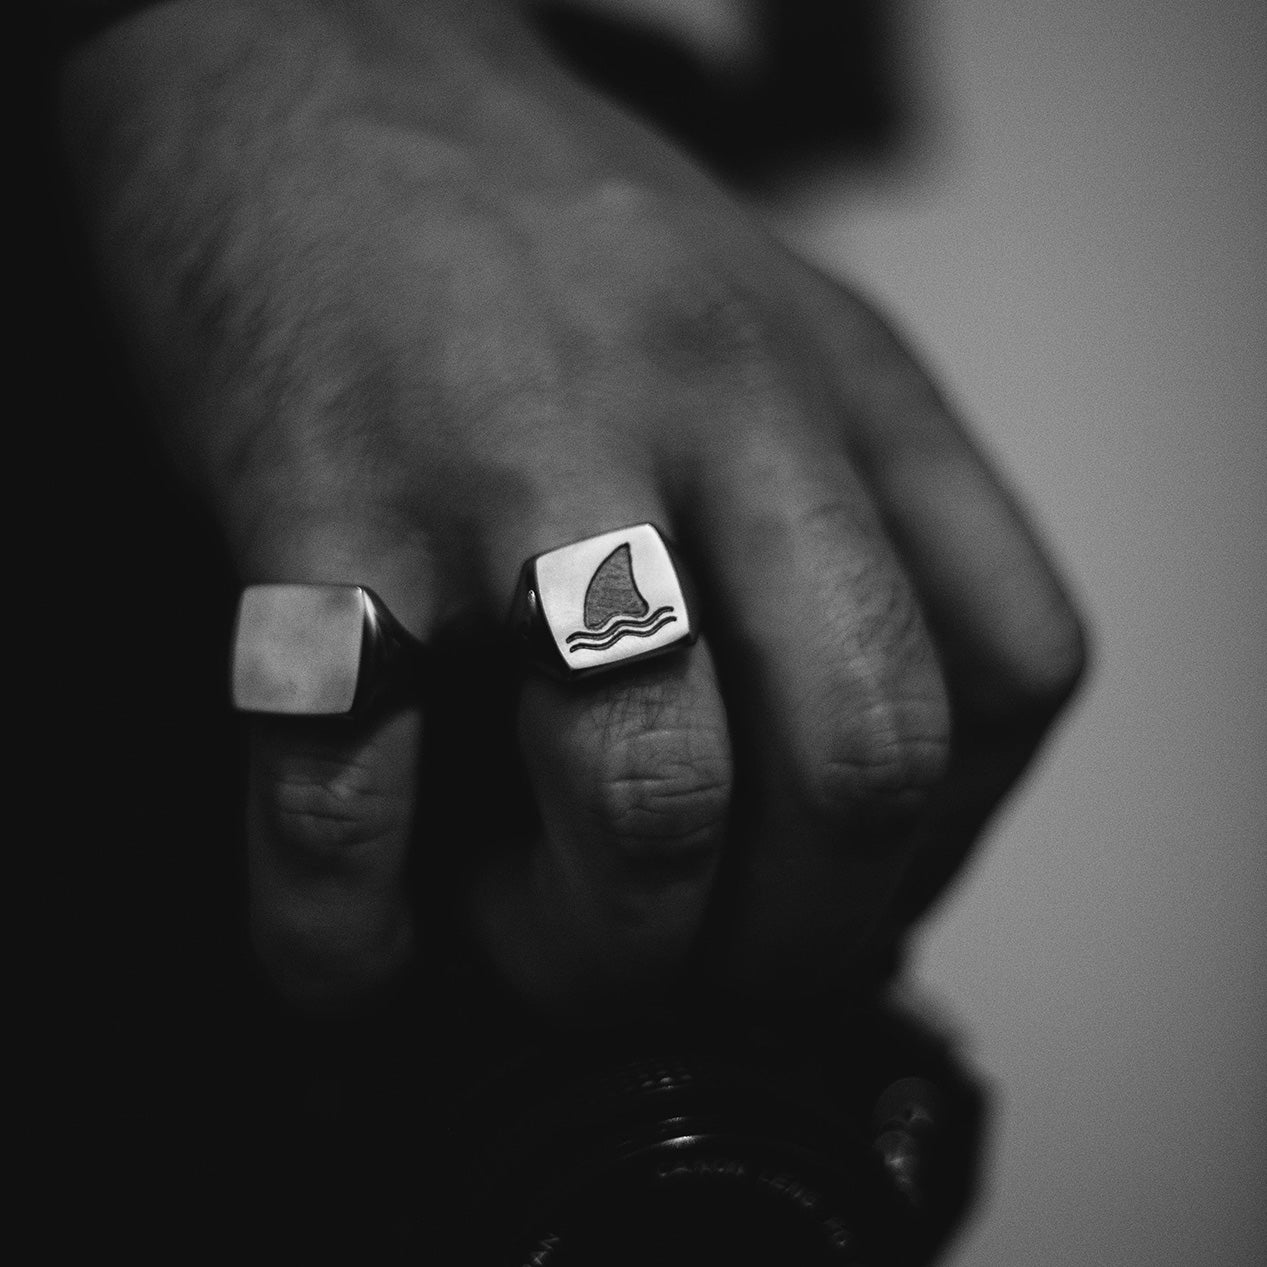 Black and white image of a hand wearing two titanium signet rings, one with no engraving and one with an engraved shark fin.